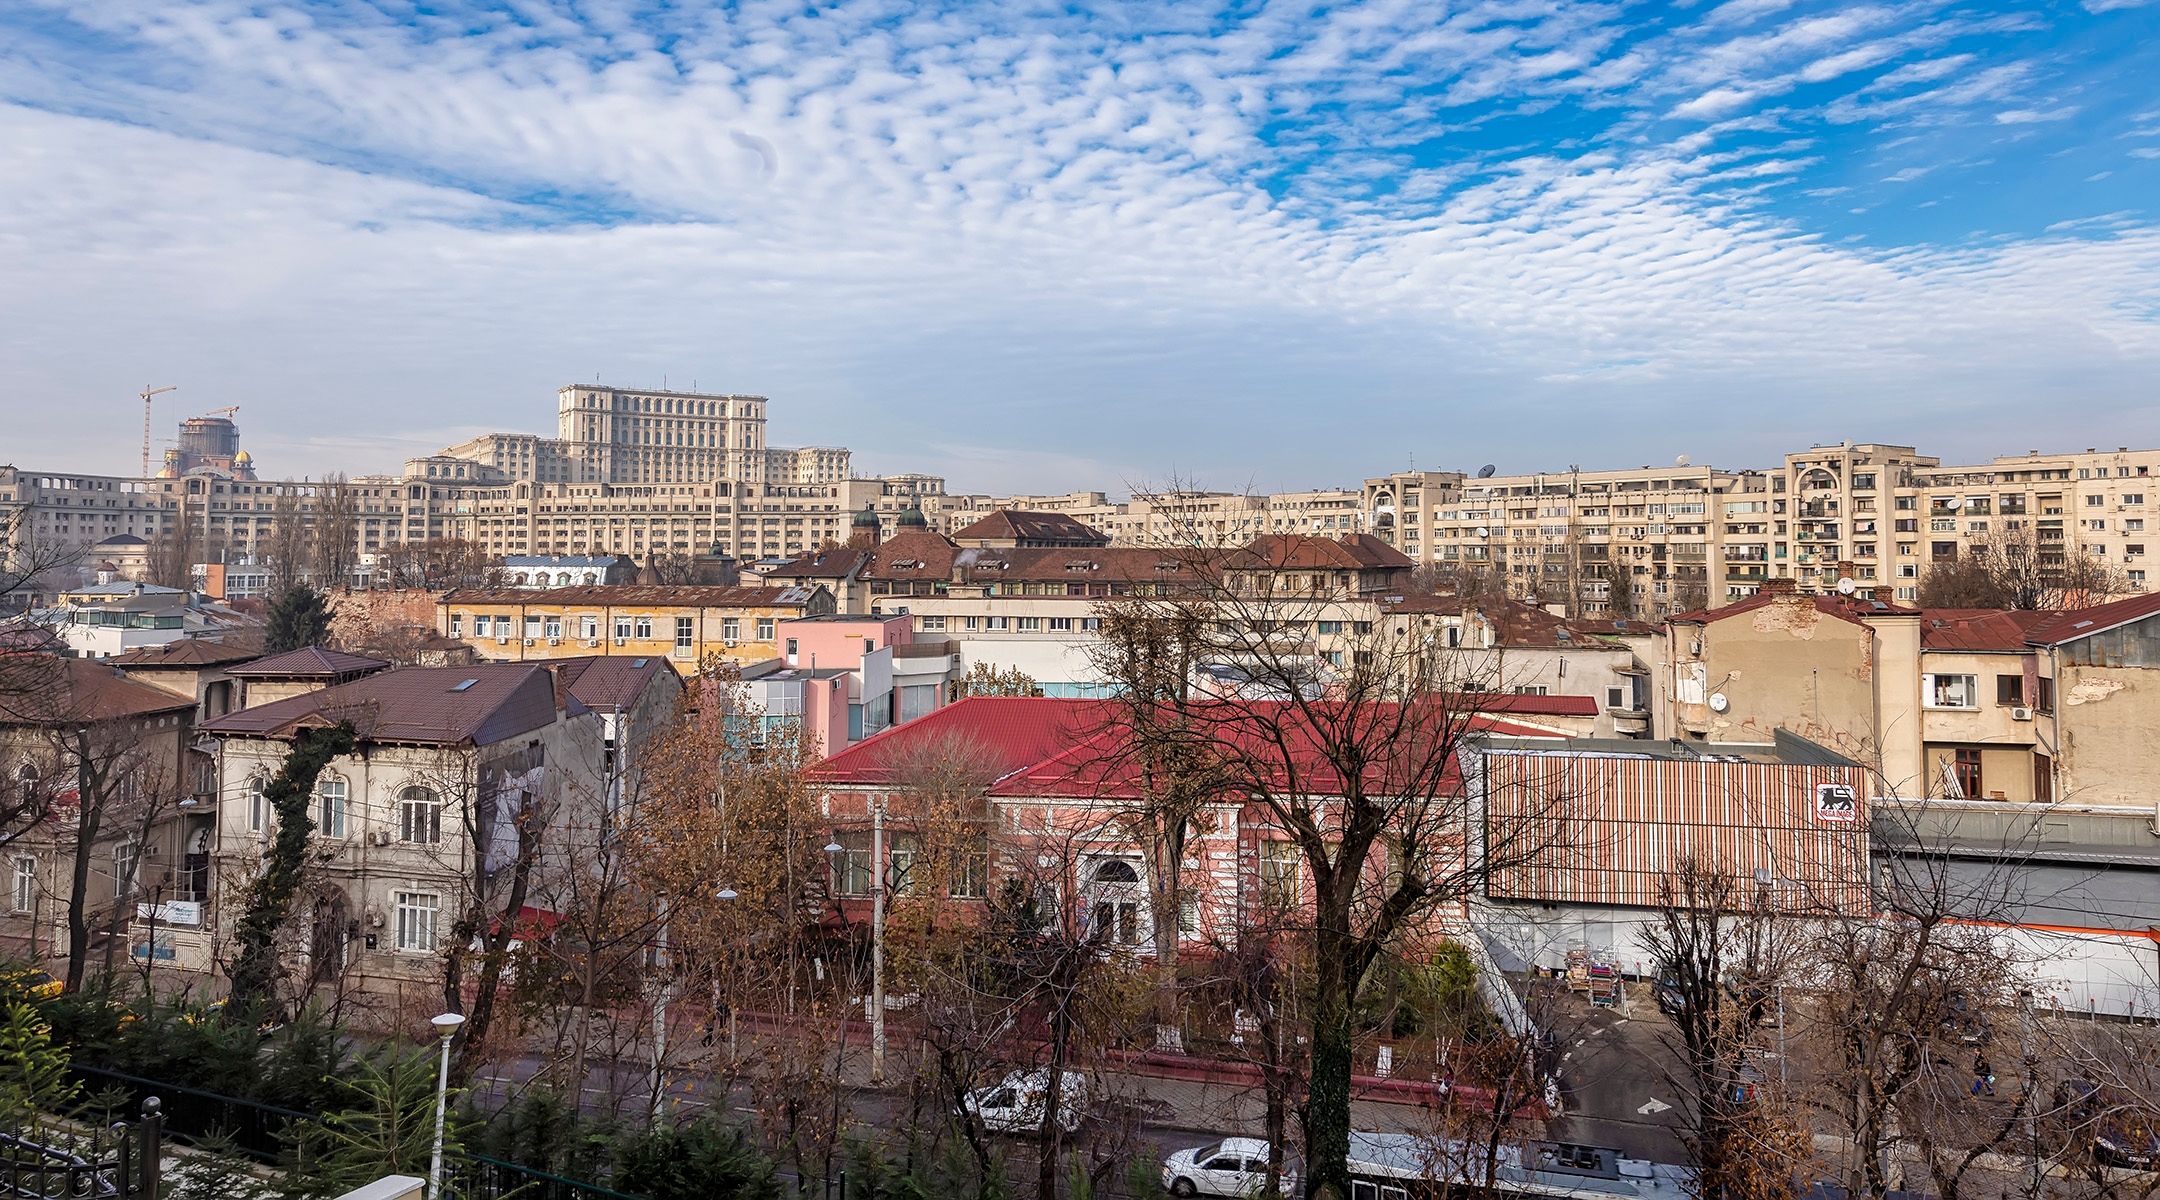 Downtown Bucharest and the Romanian parliament building are seen from the city’s Patriarchal Cathedral, Dec. 8, 2018. (Laszlo Szirtesi/Getty Images)